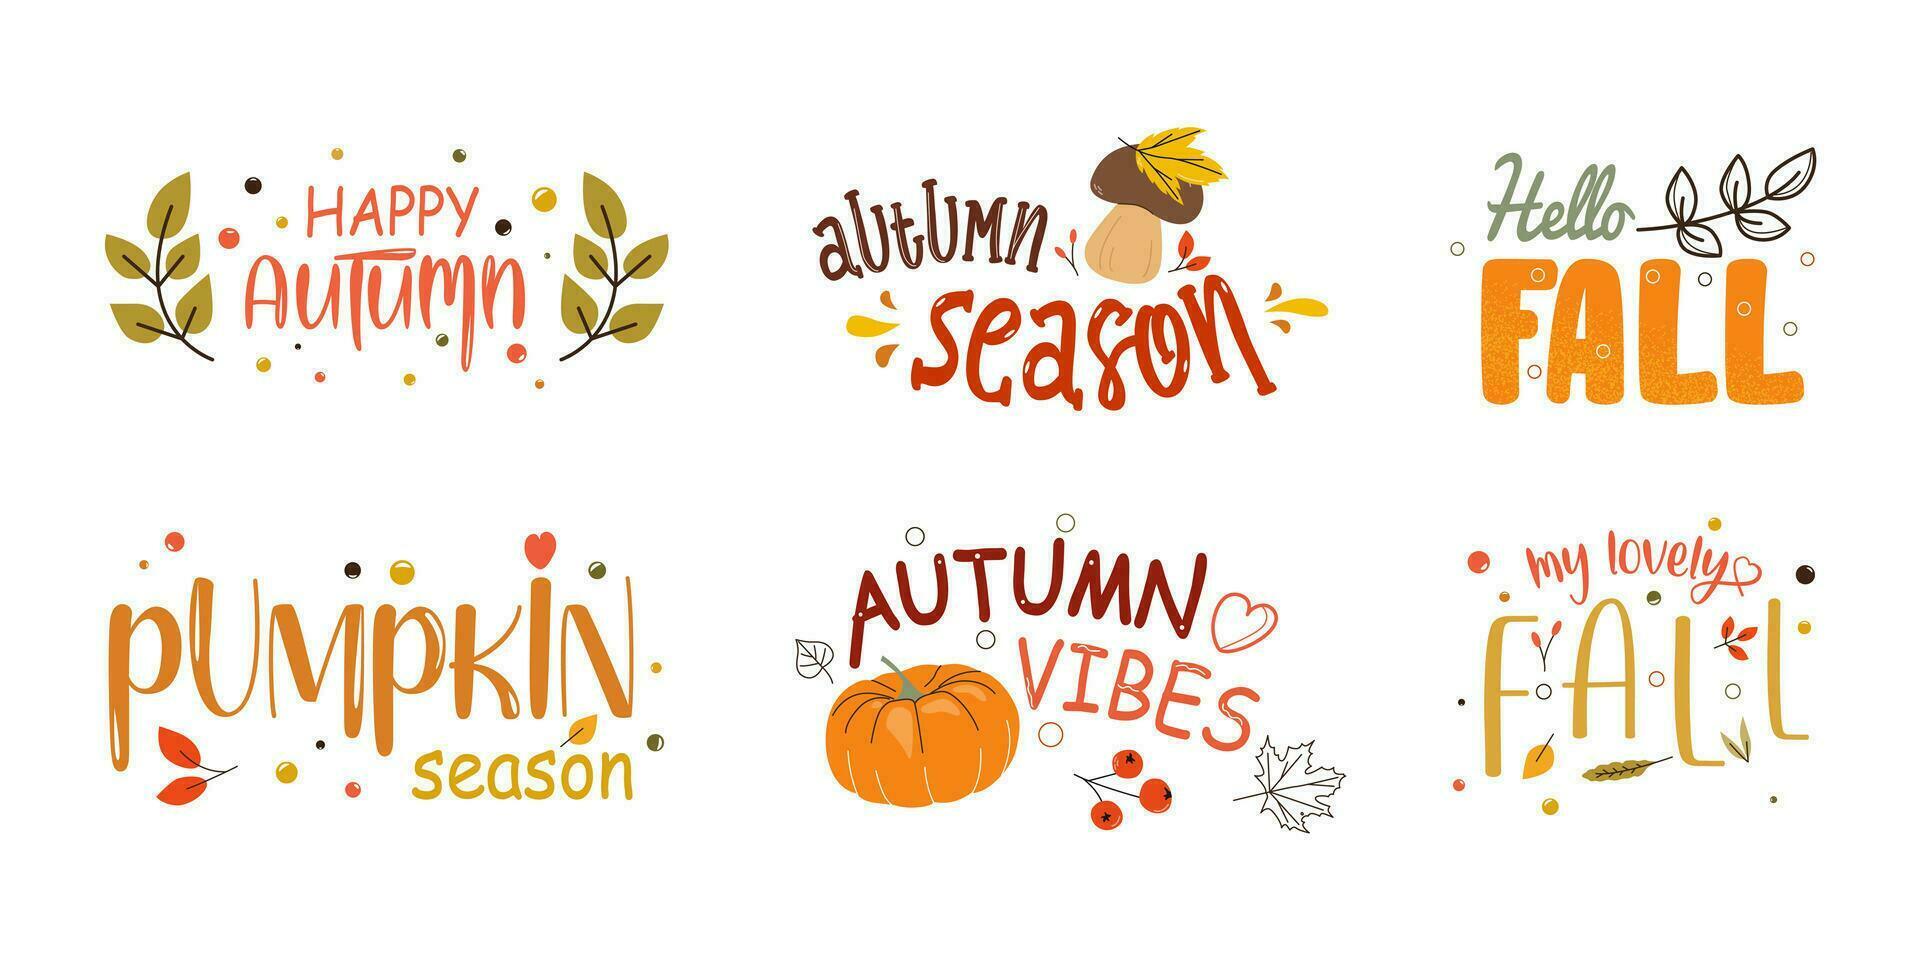 Set of autumn phrases with cozy and cute decorations Happy autumn, season, hello fall, pumpkin season, autumn vibe, my favorite autumn season. For banners, postcards, stickers, design vector